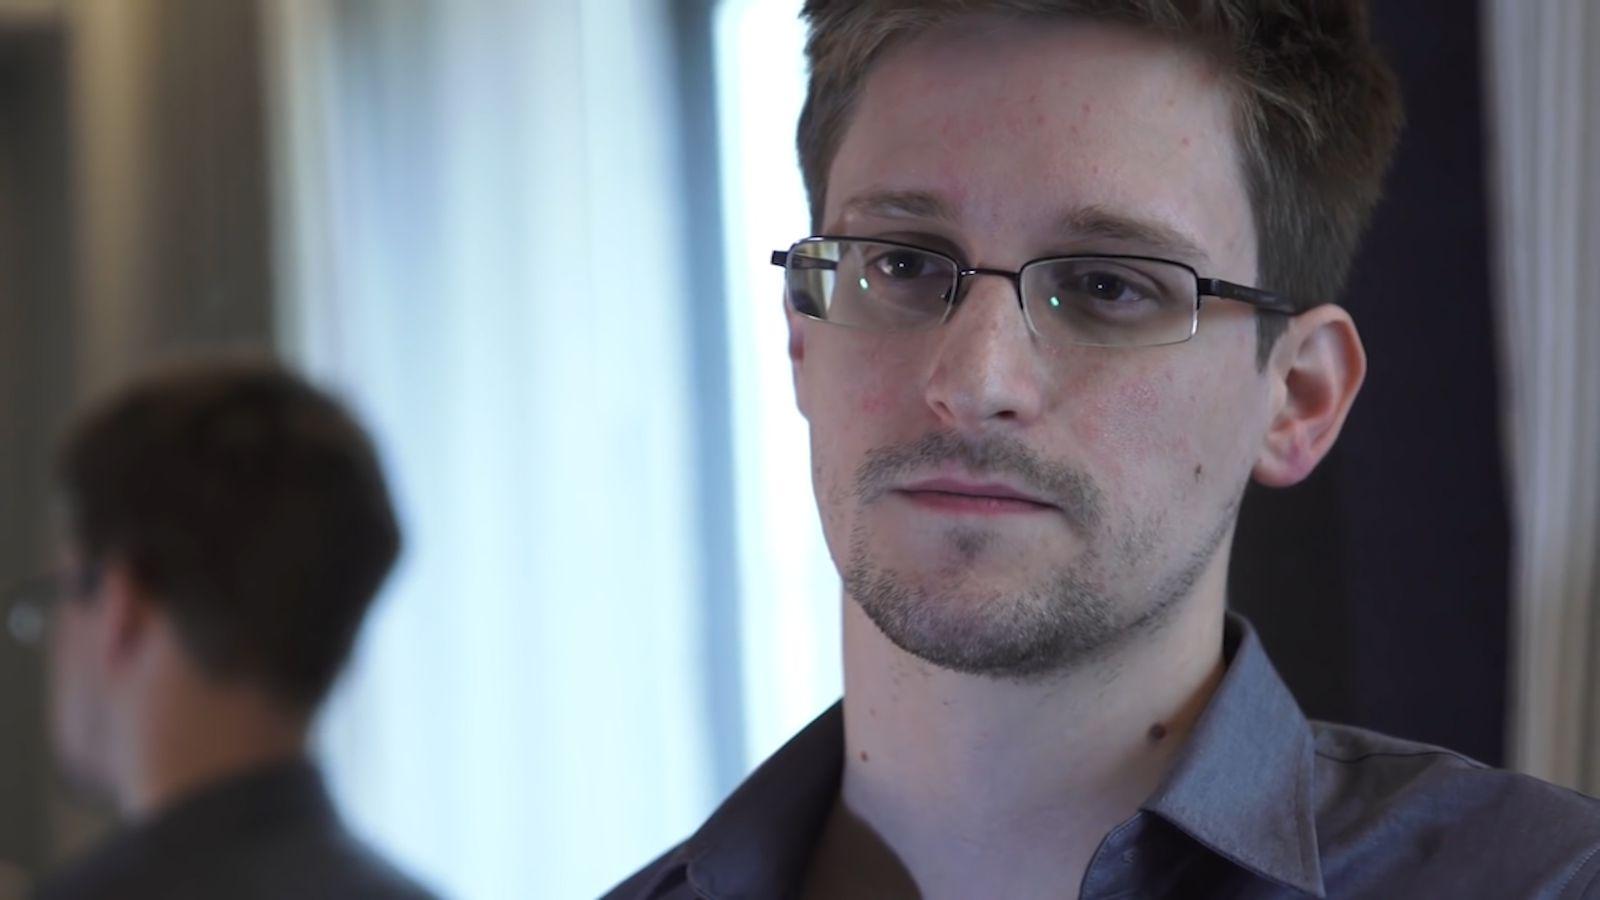 The Snowden effect: Privacy is good for business